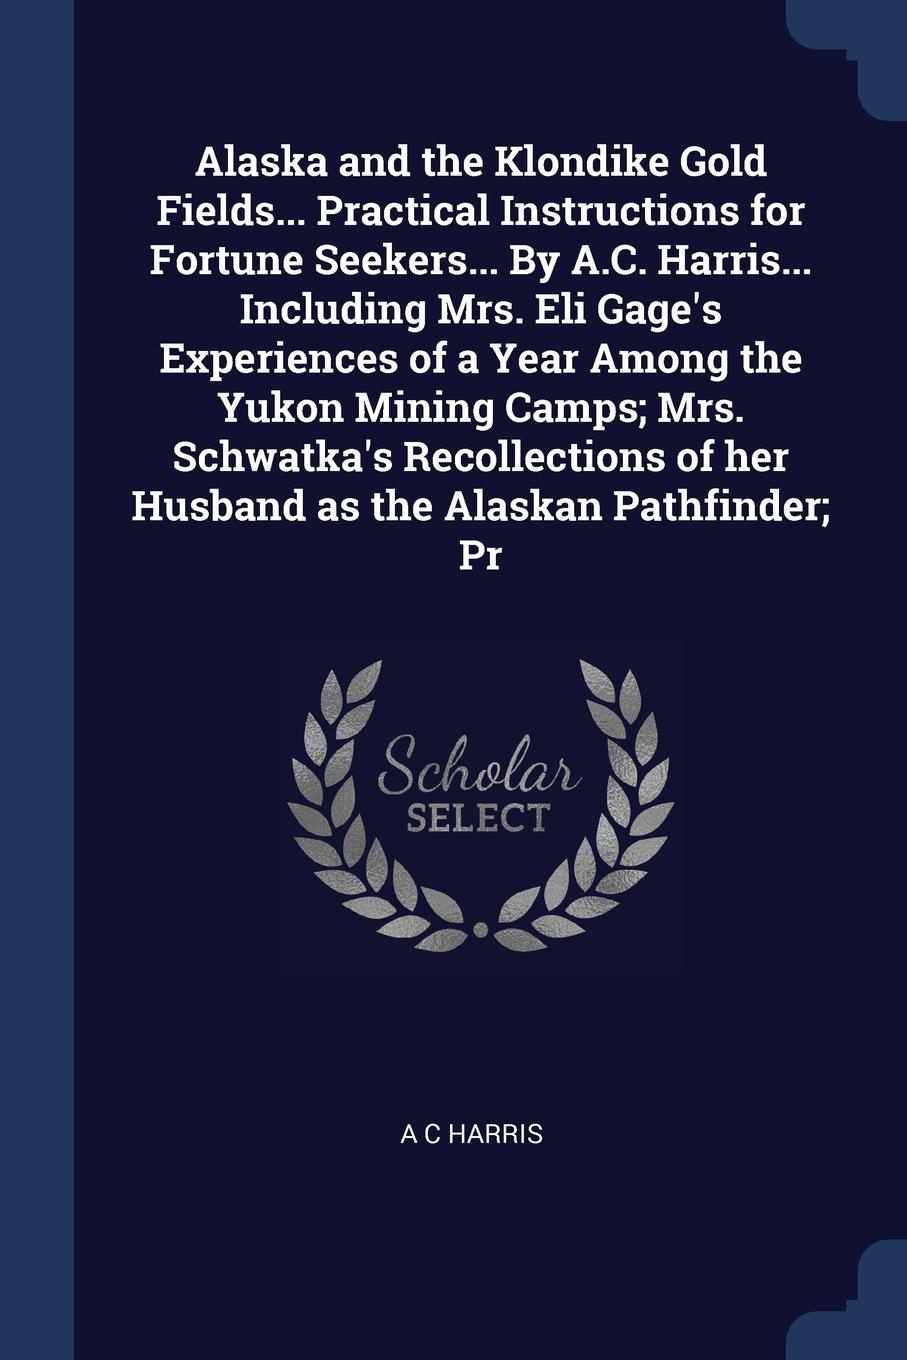 Alaska and the Klondike Gold Fields... Practical Instructions for Fortune Seekers... By A.C. Harris... Including Mrs. Eli Gage`s Experiences of a Year Among the Yukon Mining Camps; Mrs. Schwatka`s Recollections of her Husband as the Alaskan Pathfi...